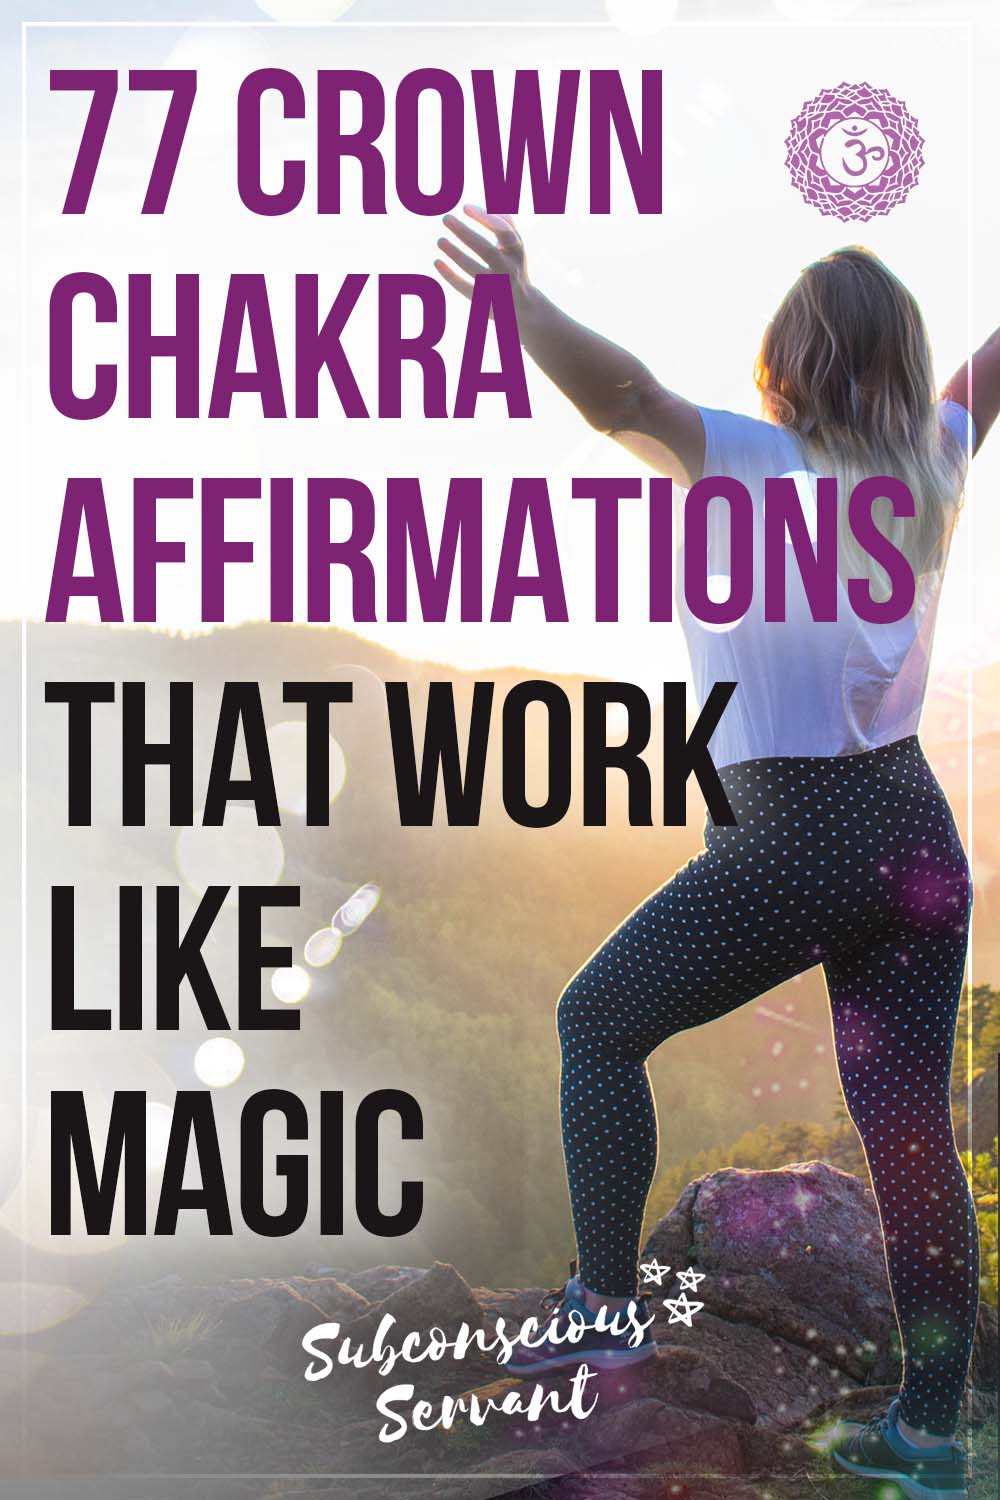 77 Crown Chakra Affirmations That Work Like Magic + Usage Guide